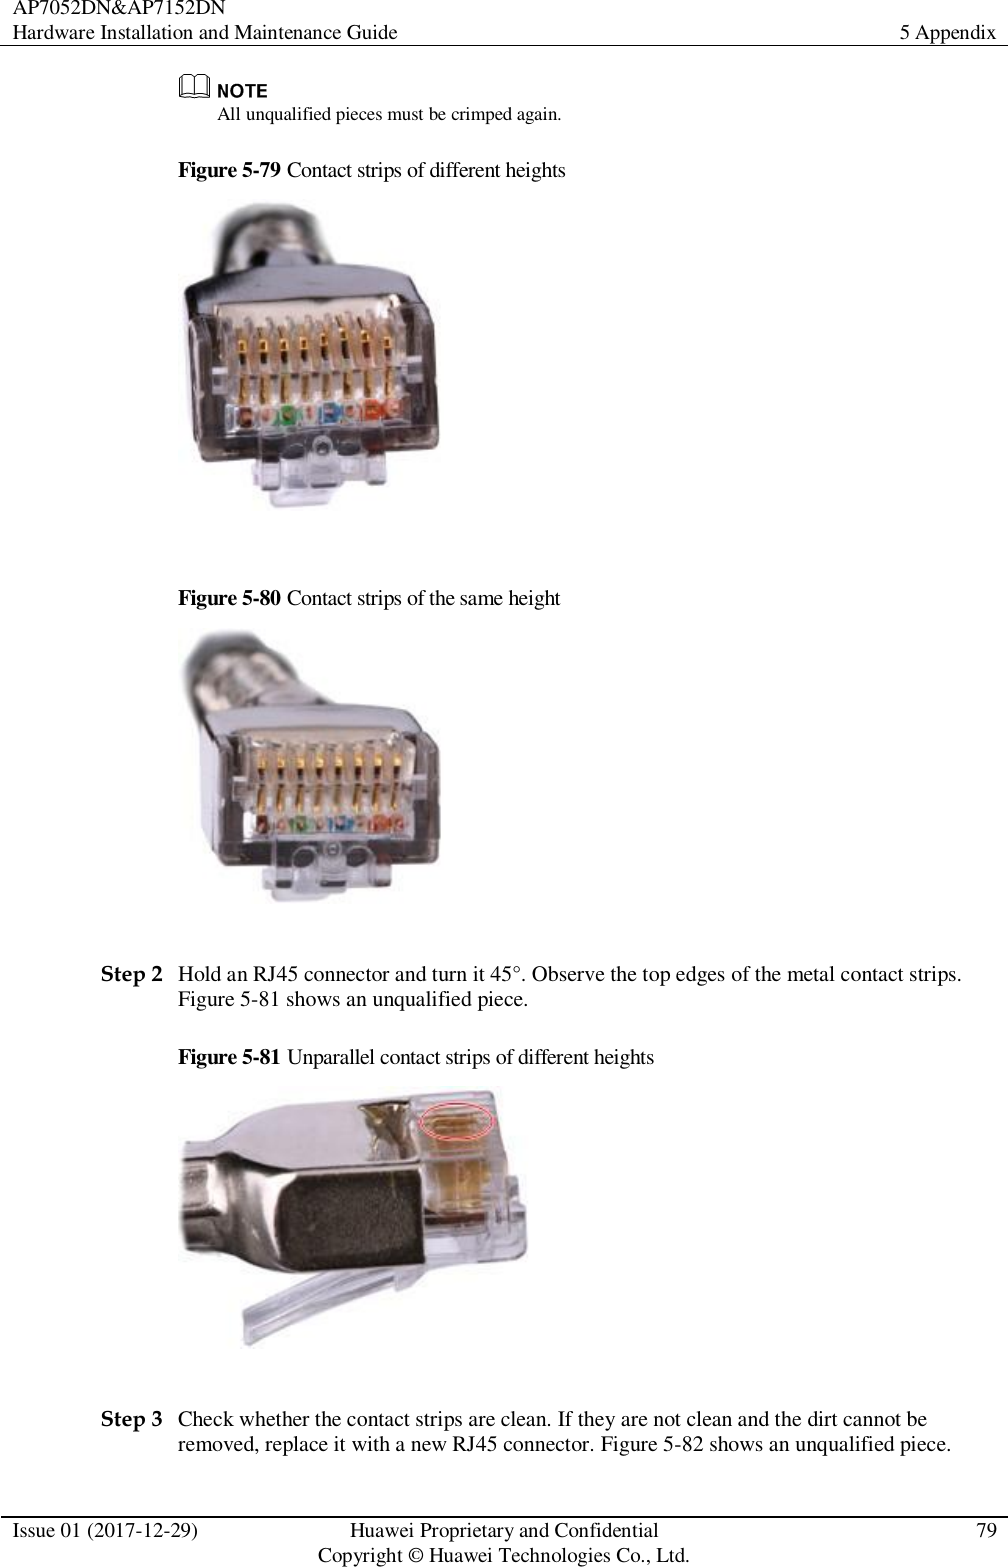 AP7052DN&amp;AP7152DN Hardware Installation and Maintenance Guide 5 Appendix  Issue 01 (2017-12-29) Huawei Proprietary and Confidential                                     Copyright © Huawei Technologies Co., Ltd. 79   All unqualified pieces must be crimped again. Figure 5-79 Contact strips of different heights   Figure 5-80 Contact strips of the same height   Step 2 Hold an RJ45 connector and turn it 45°. Observe the top edges of the metal contact strips. Figure 5-81 shows an unqualified piece. Figure 5-81 Unparallel contact strips of different heights   Step 3 Check whether the contact strips are clean. If they are not clean and the dirt cannot be removed, replace it with a new RJ45 connector. Figure 5-82 shows an unqualified piece. 